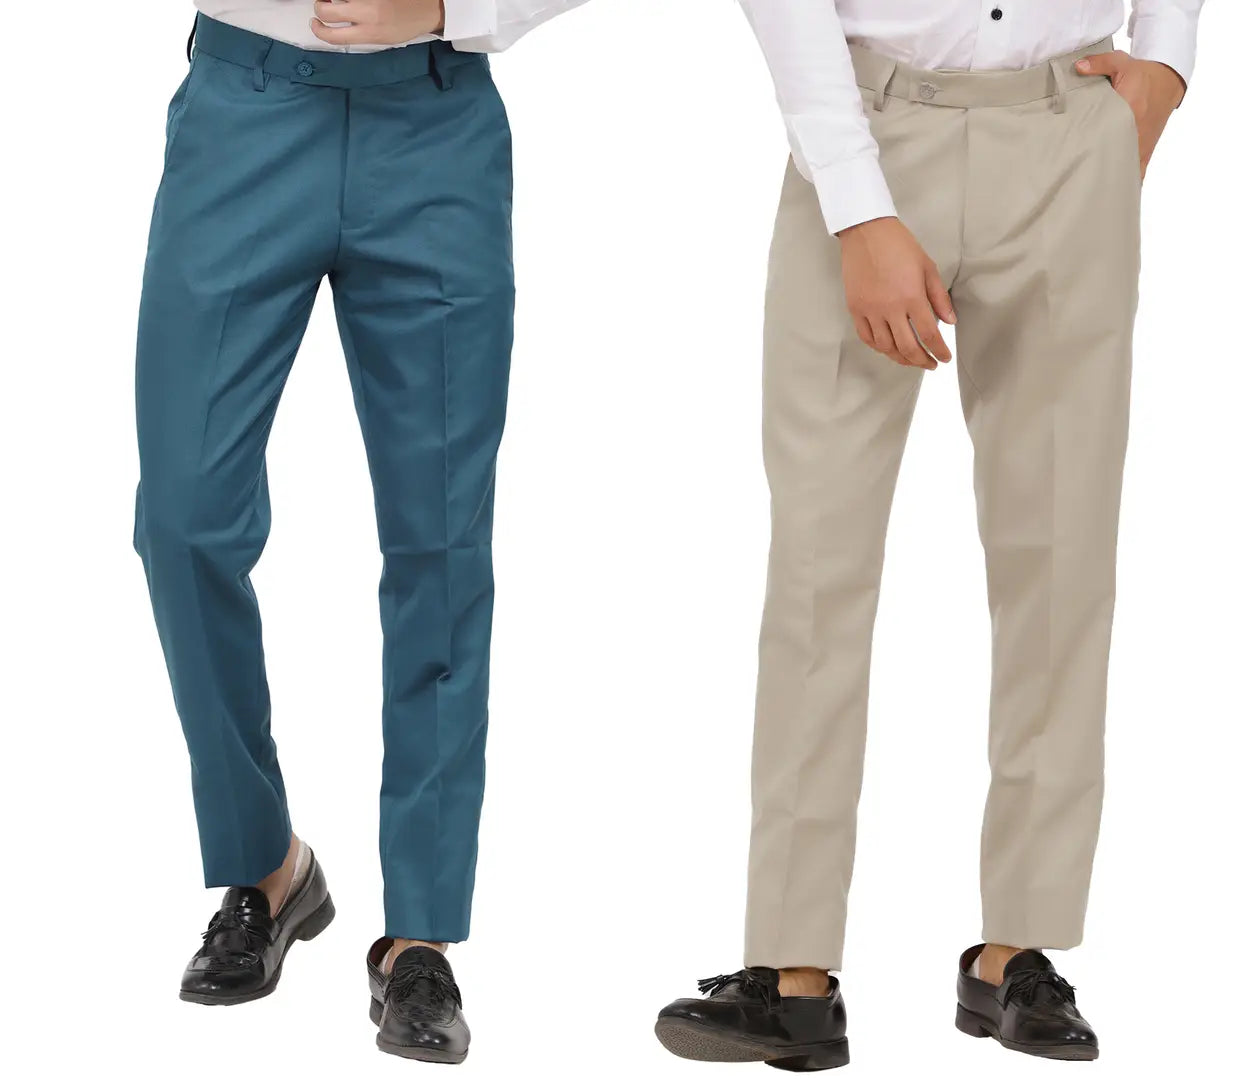 Kundan Men Poly-Viscose Blended Morpich Blue and Light Cot Brown Formal Trousers ( Pack of 2 Trousers )